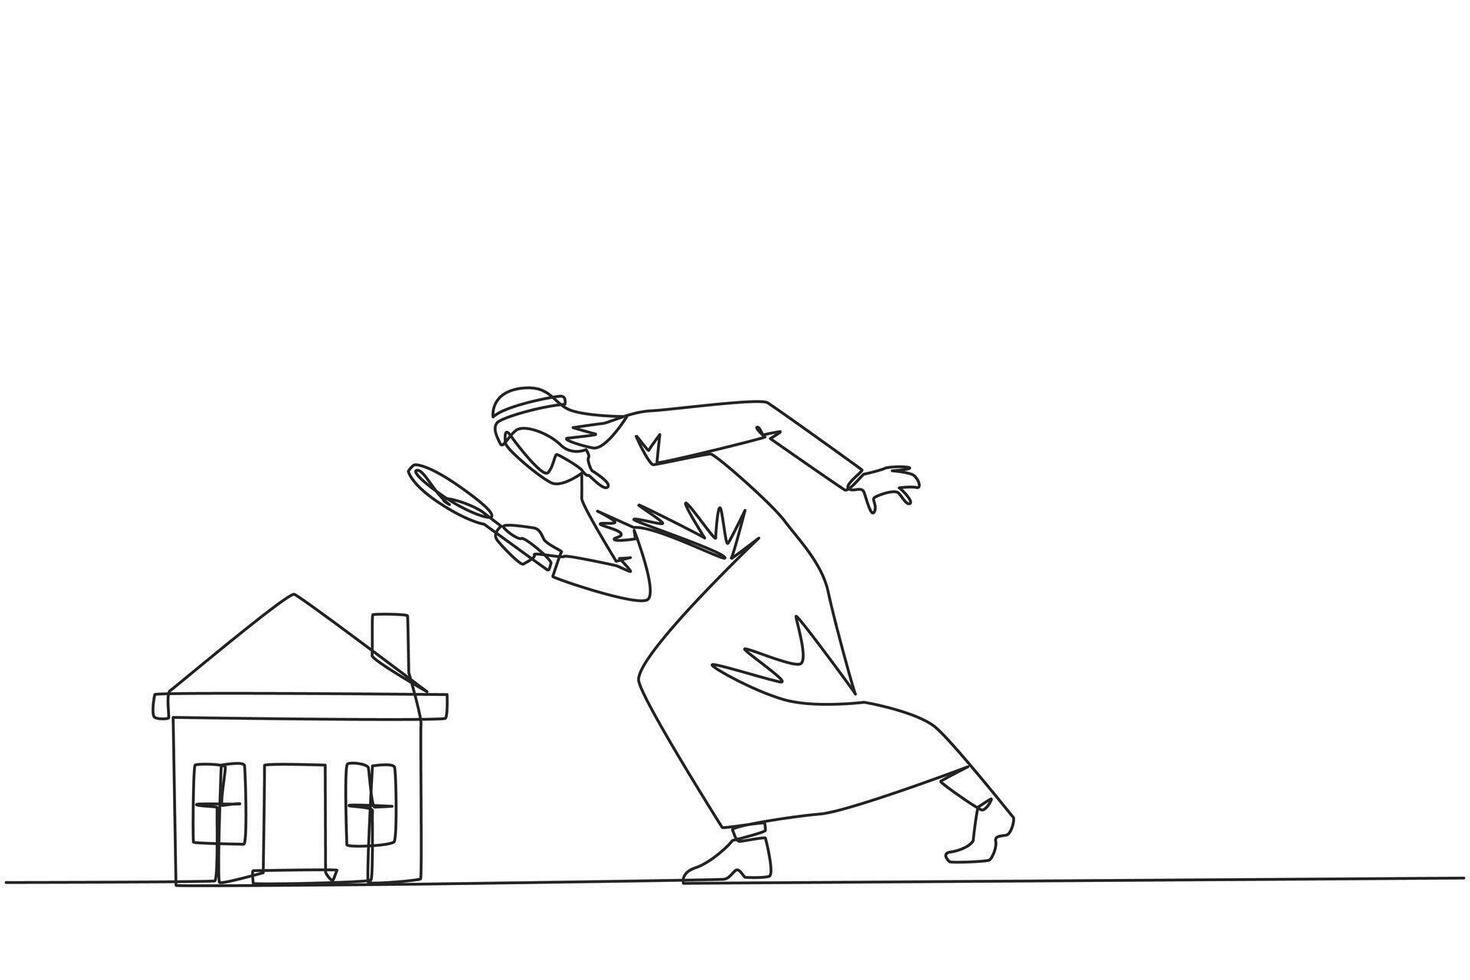 Single continuous line drawing of Arabian businessman holding magnifying glass looking at miniature house. Get ready to make passive income after viewing a house. One line design illustration vector